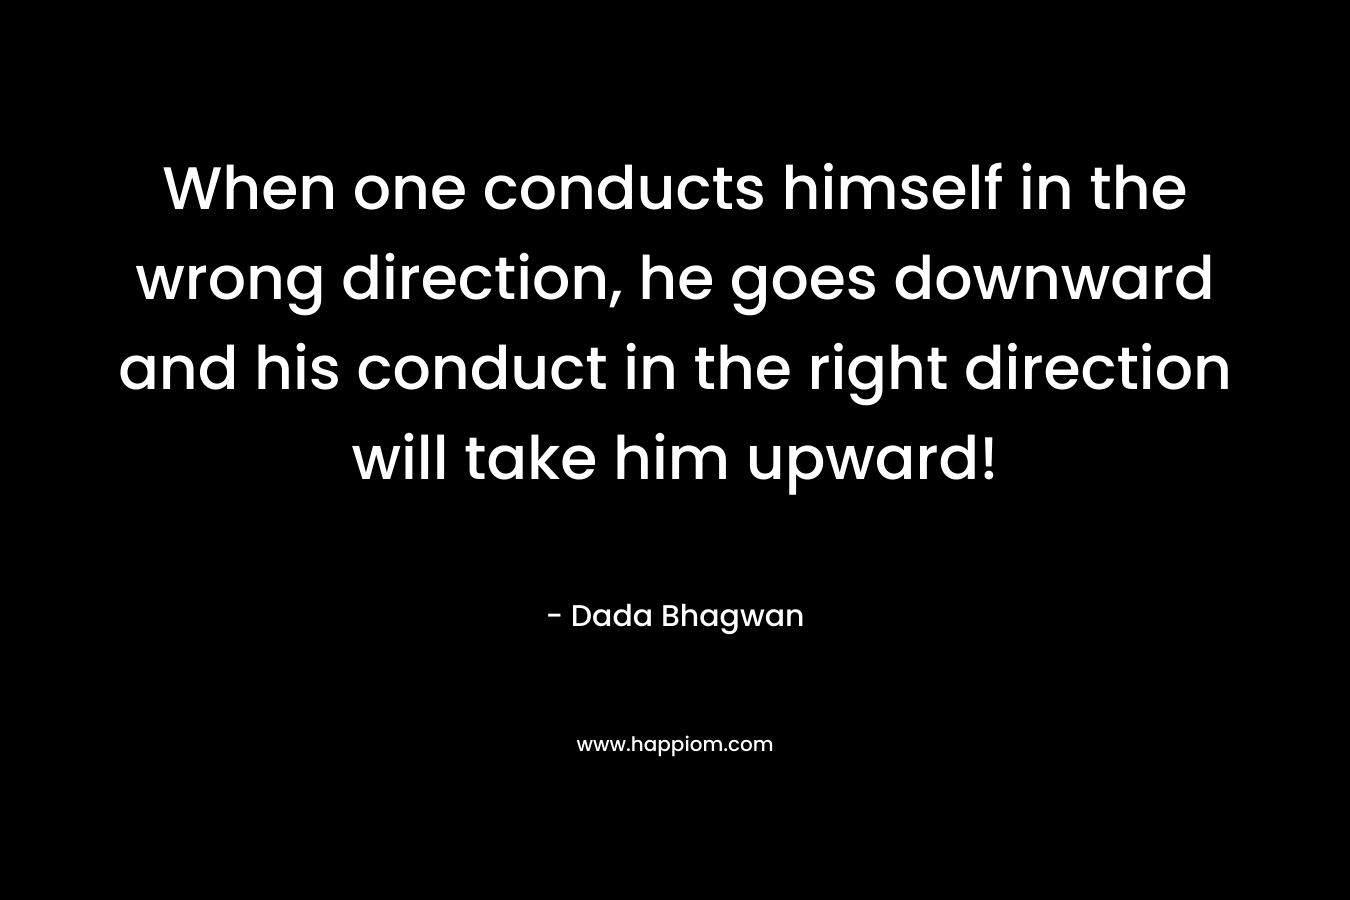 When one conducts himself in the wrong direction, he goes downward and his conduct in the right direction will take him upward! – Dada Bhagwan